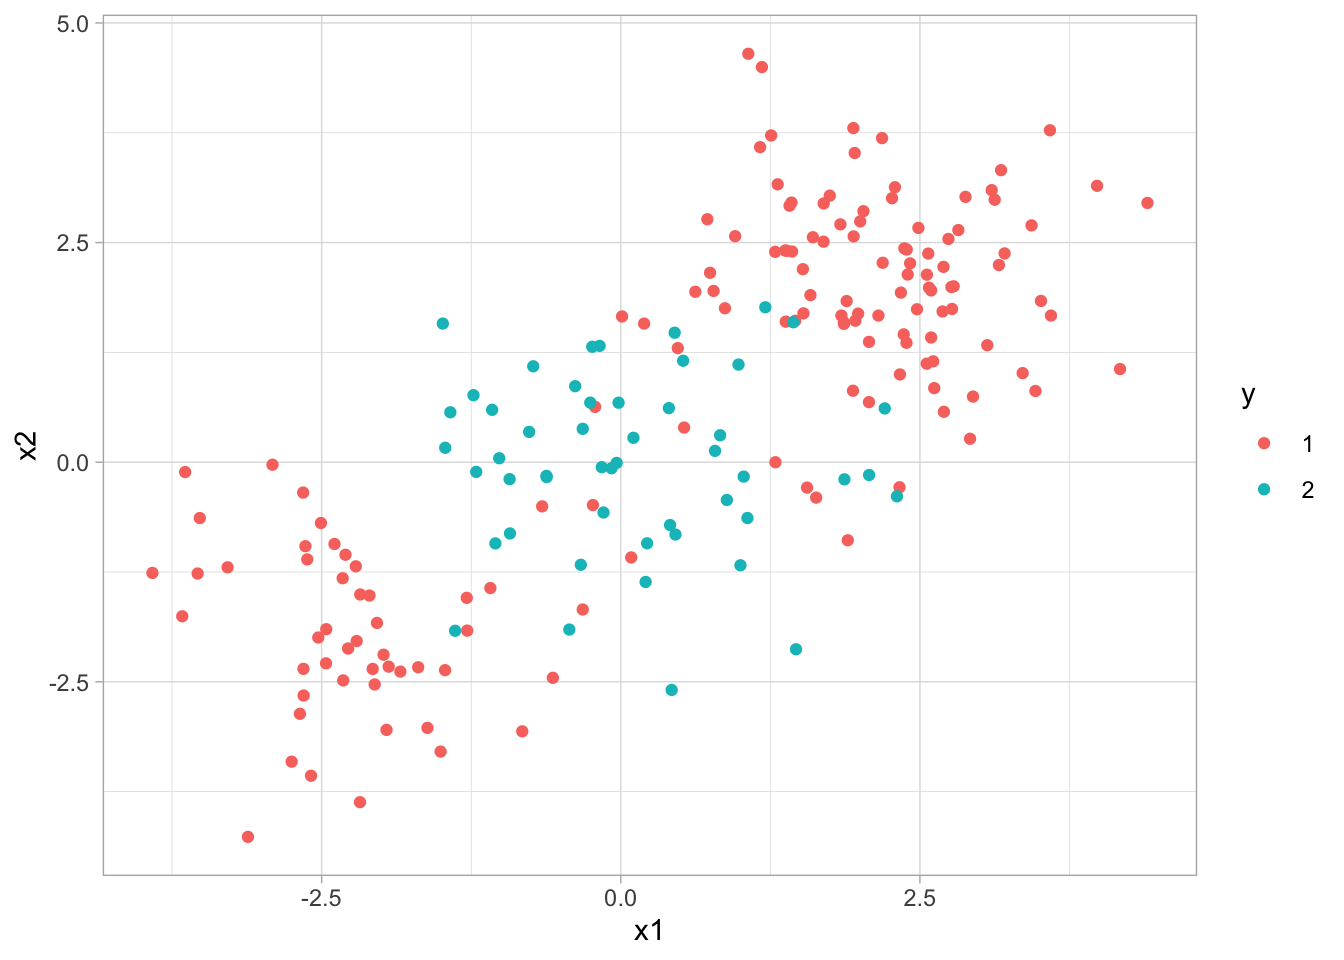 Scatter plot of sim_data2. Data is in a oblong shape with points in the middle having color and both ends having another color.